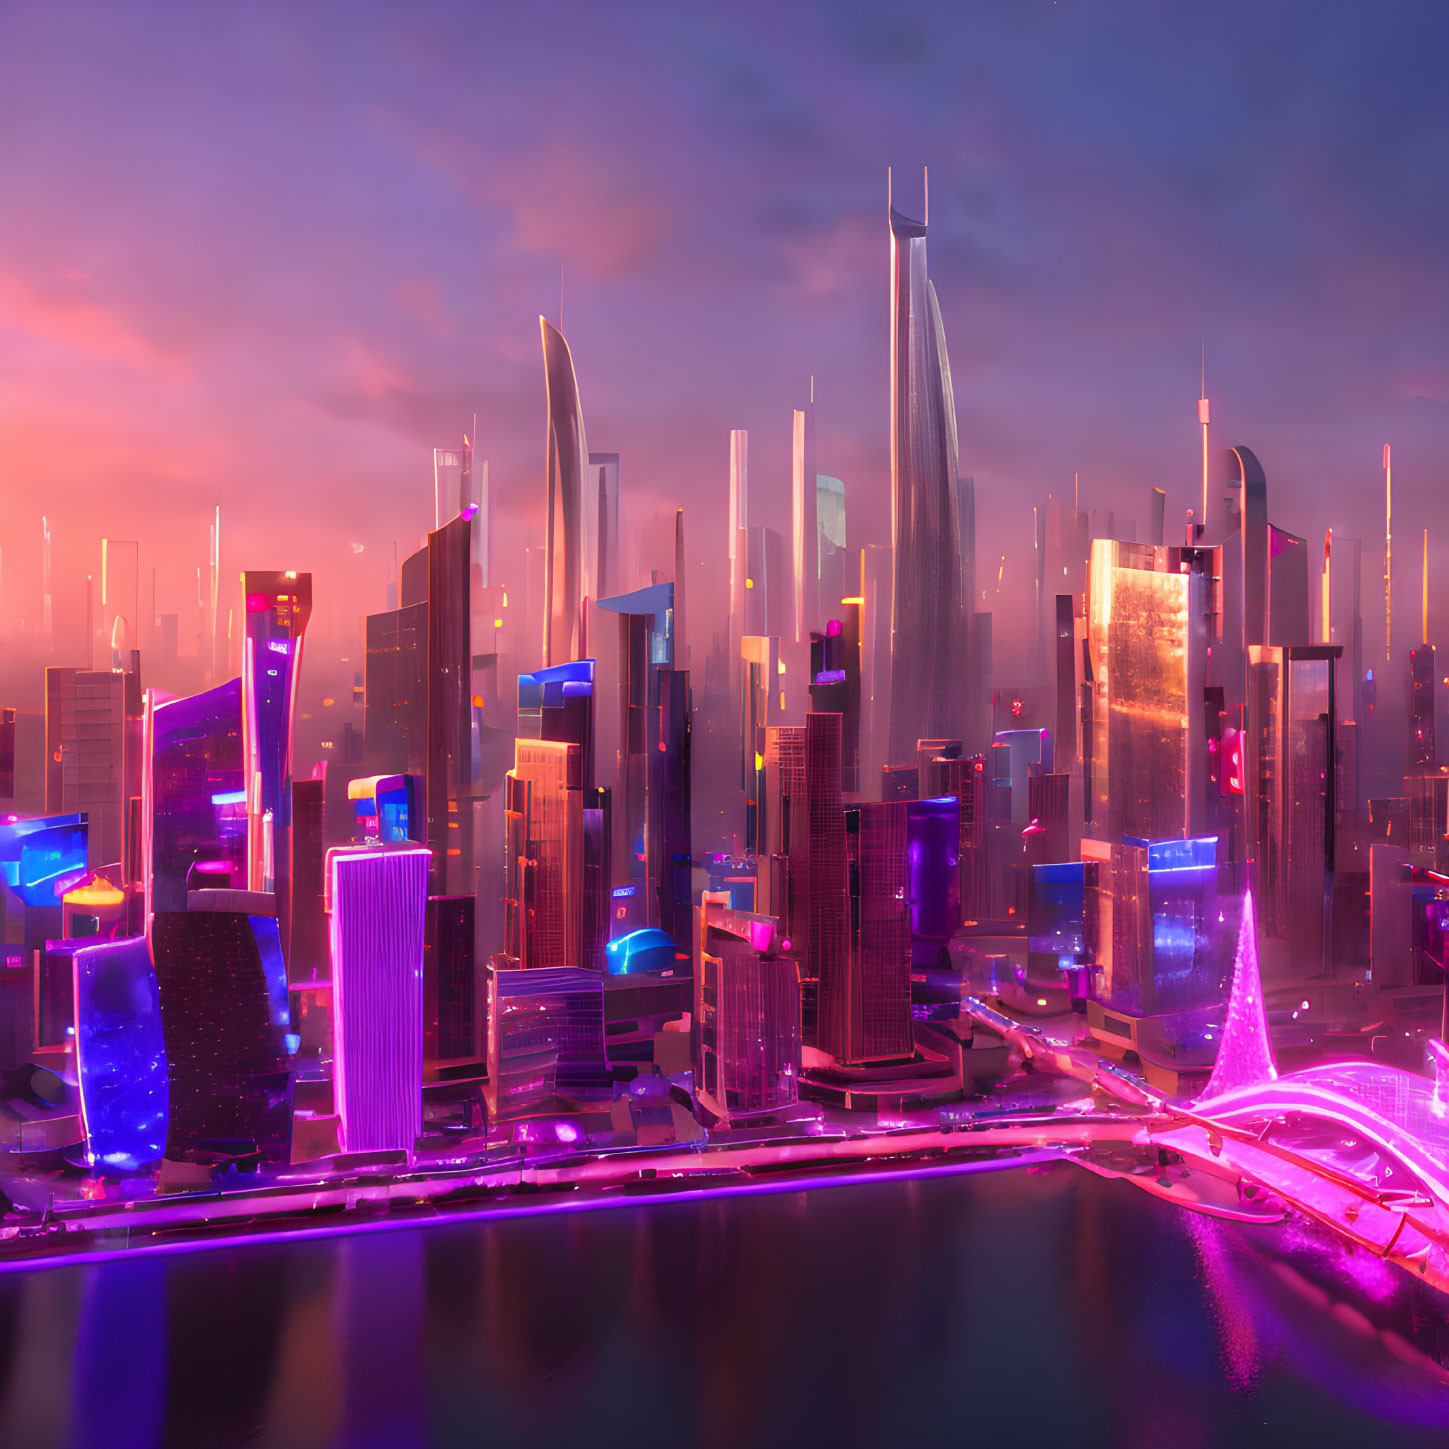 Futuristic cityscape with neon lights, modern skyscrapers, and tranquil river at dusk